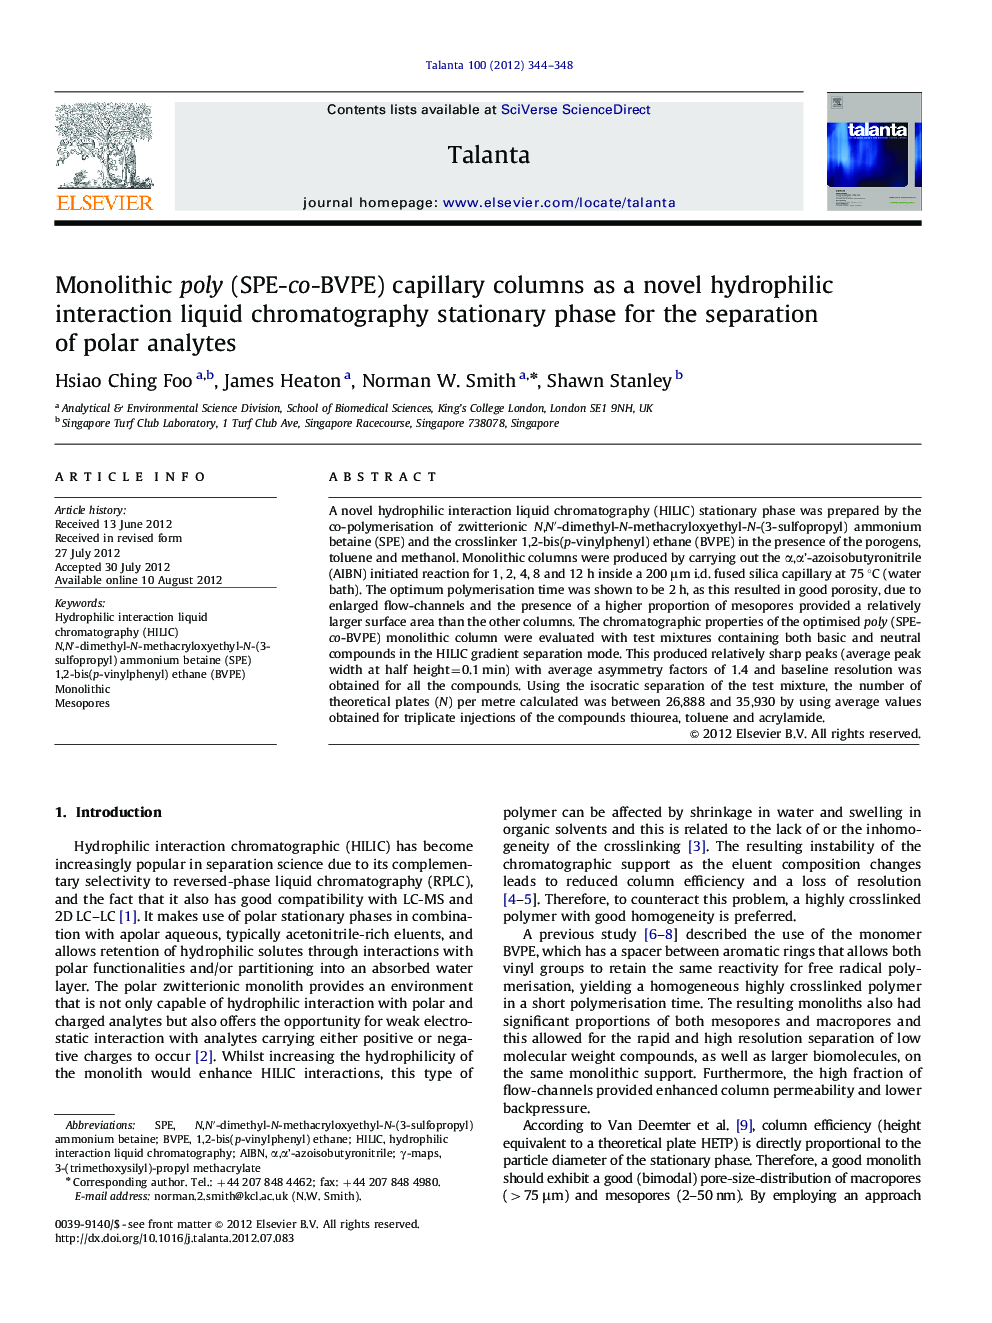 Monolithic poly (SPE-co-BVPE) capillary columns as a novel hydrophilic interaction liquid chromatography stationary phase for the separation of polar analytes